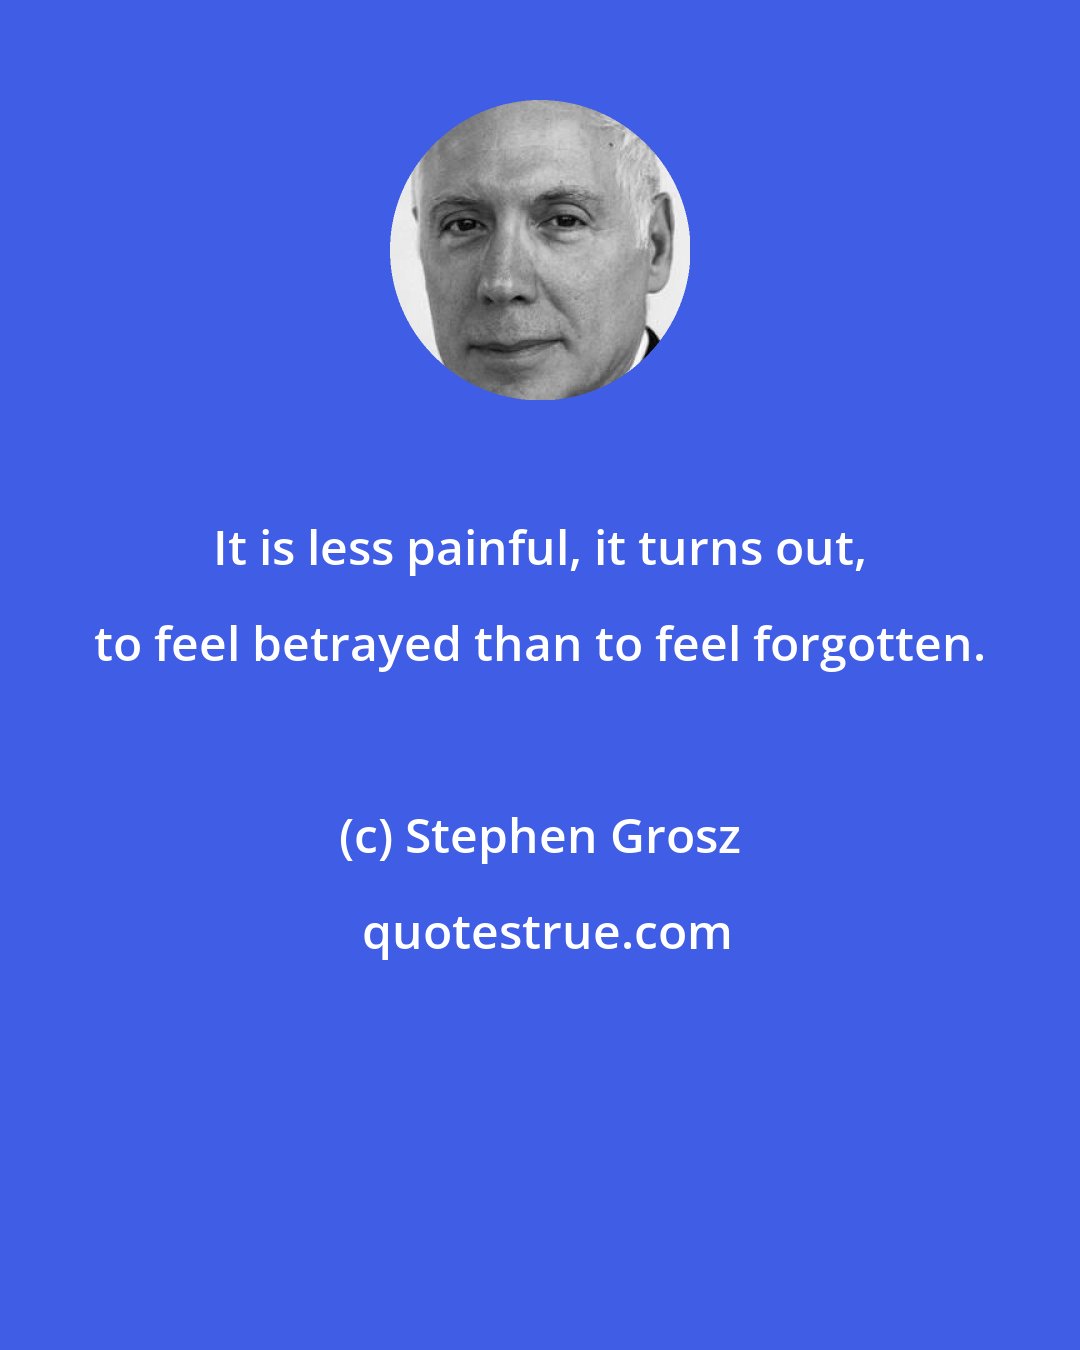 Stephen Grosz: It is less painful, it turns out, to feel betrayed than to feel forgotten.